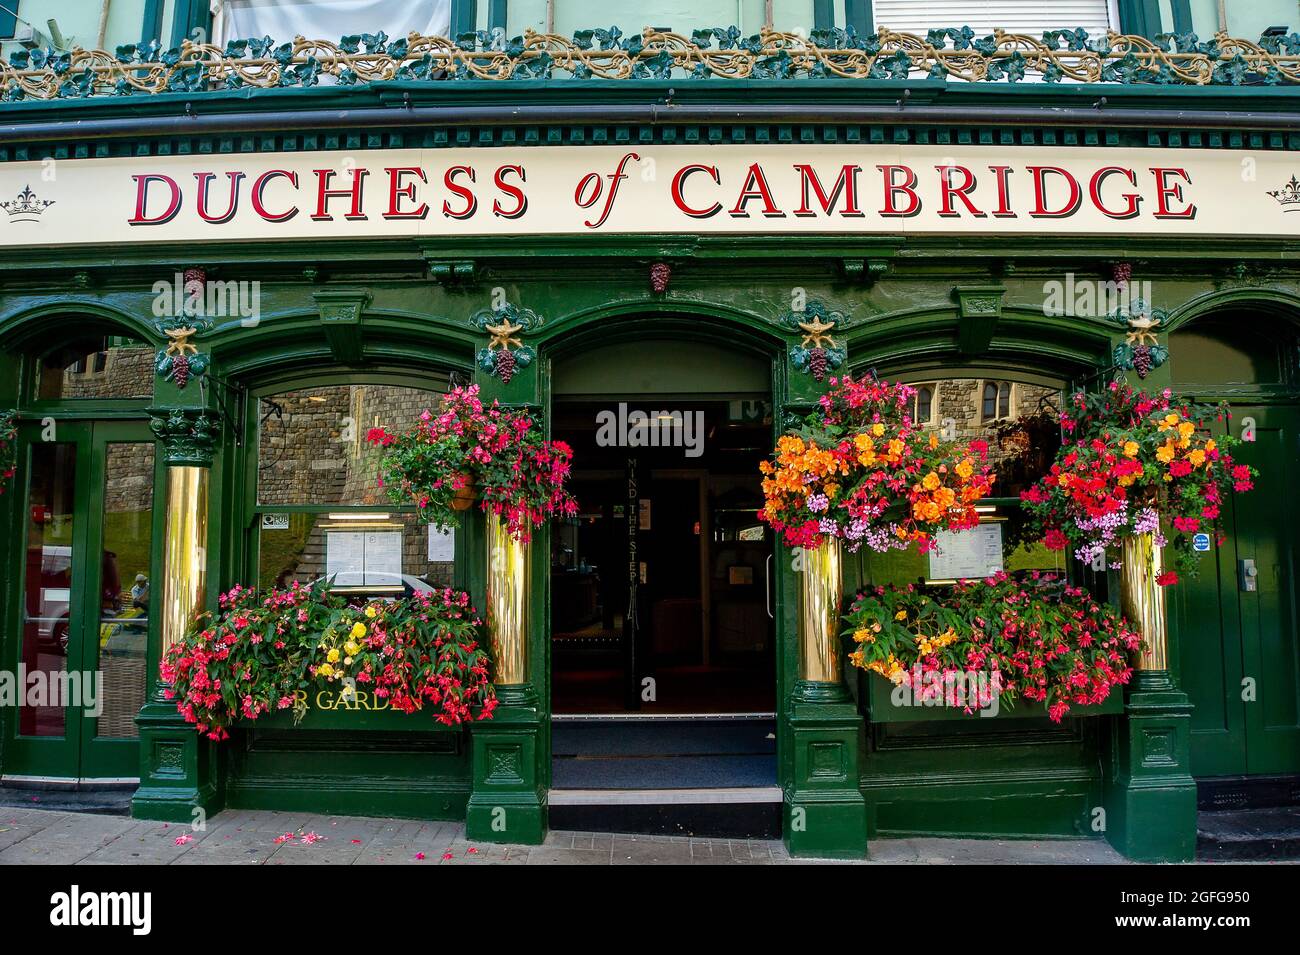 Windsor, Berkshire, UK. 25th August, 2021. The Duchess of Cambridge pub in Windsor is open for business again after being closed for months during the Covid-19 lockdown. Credit: Maureen McLean/Alamy Stock Photo